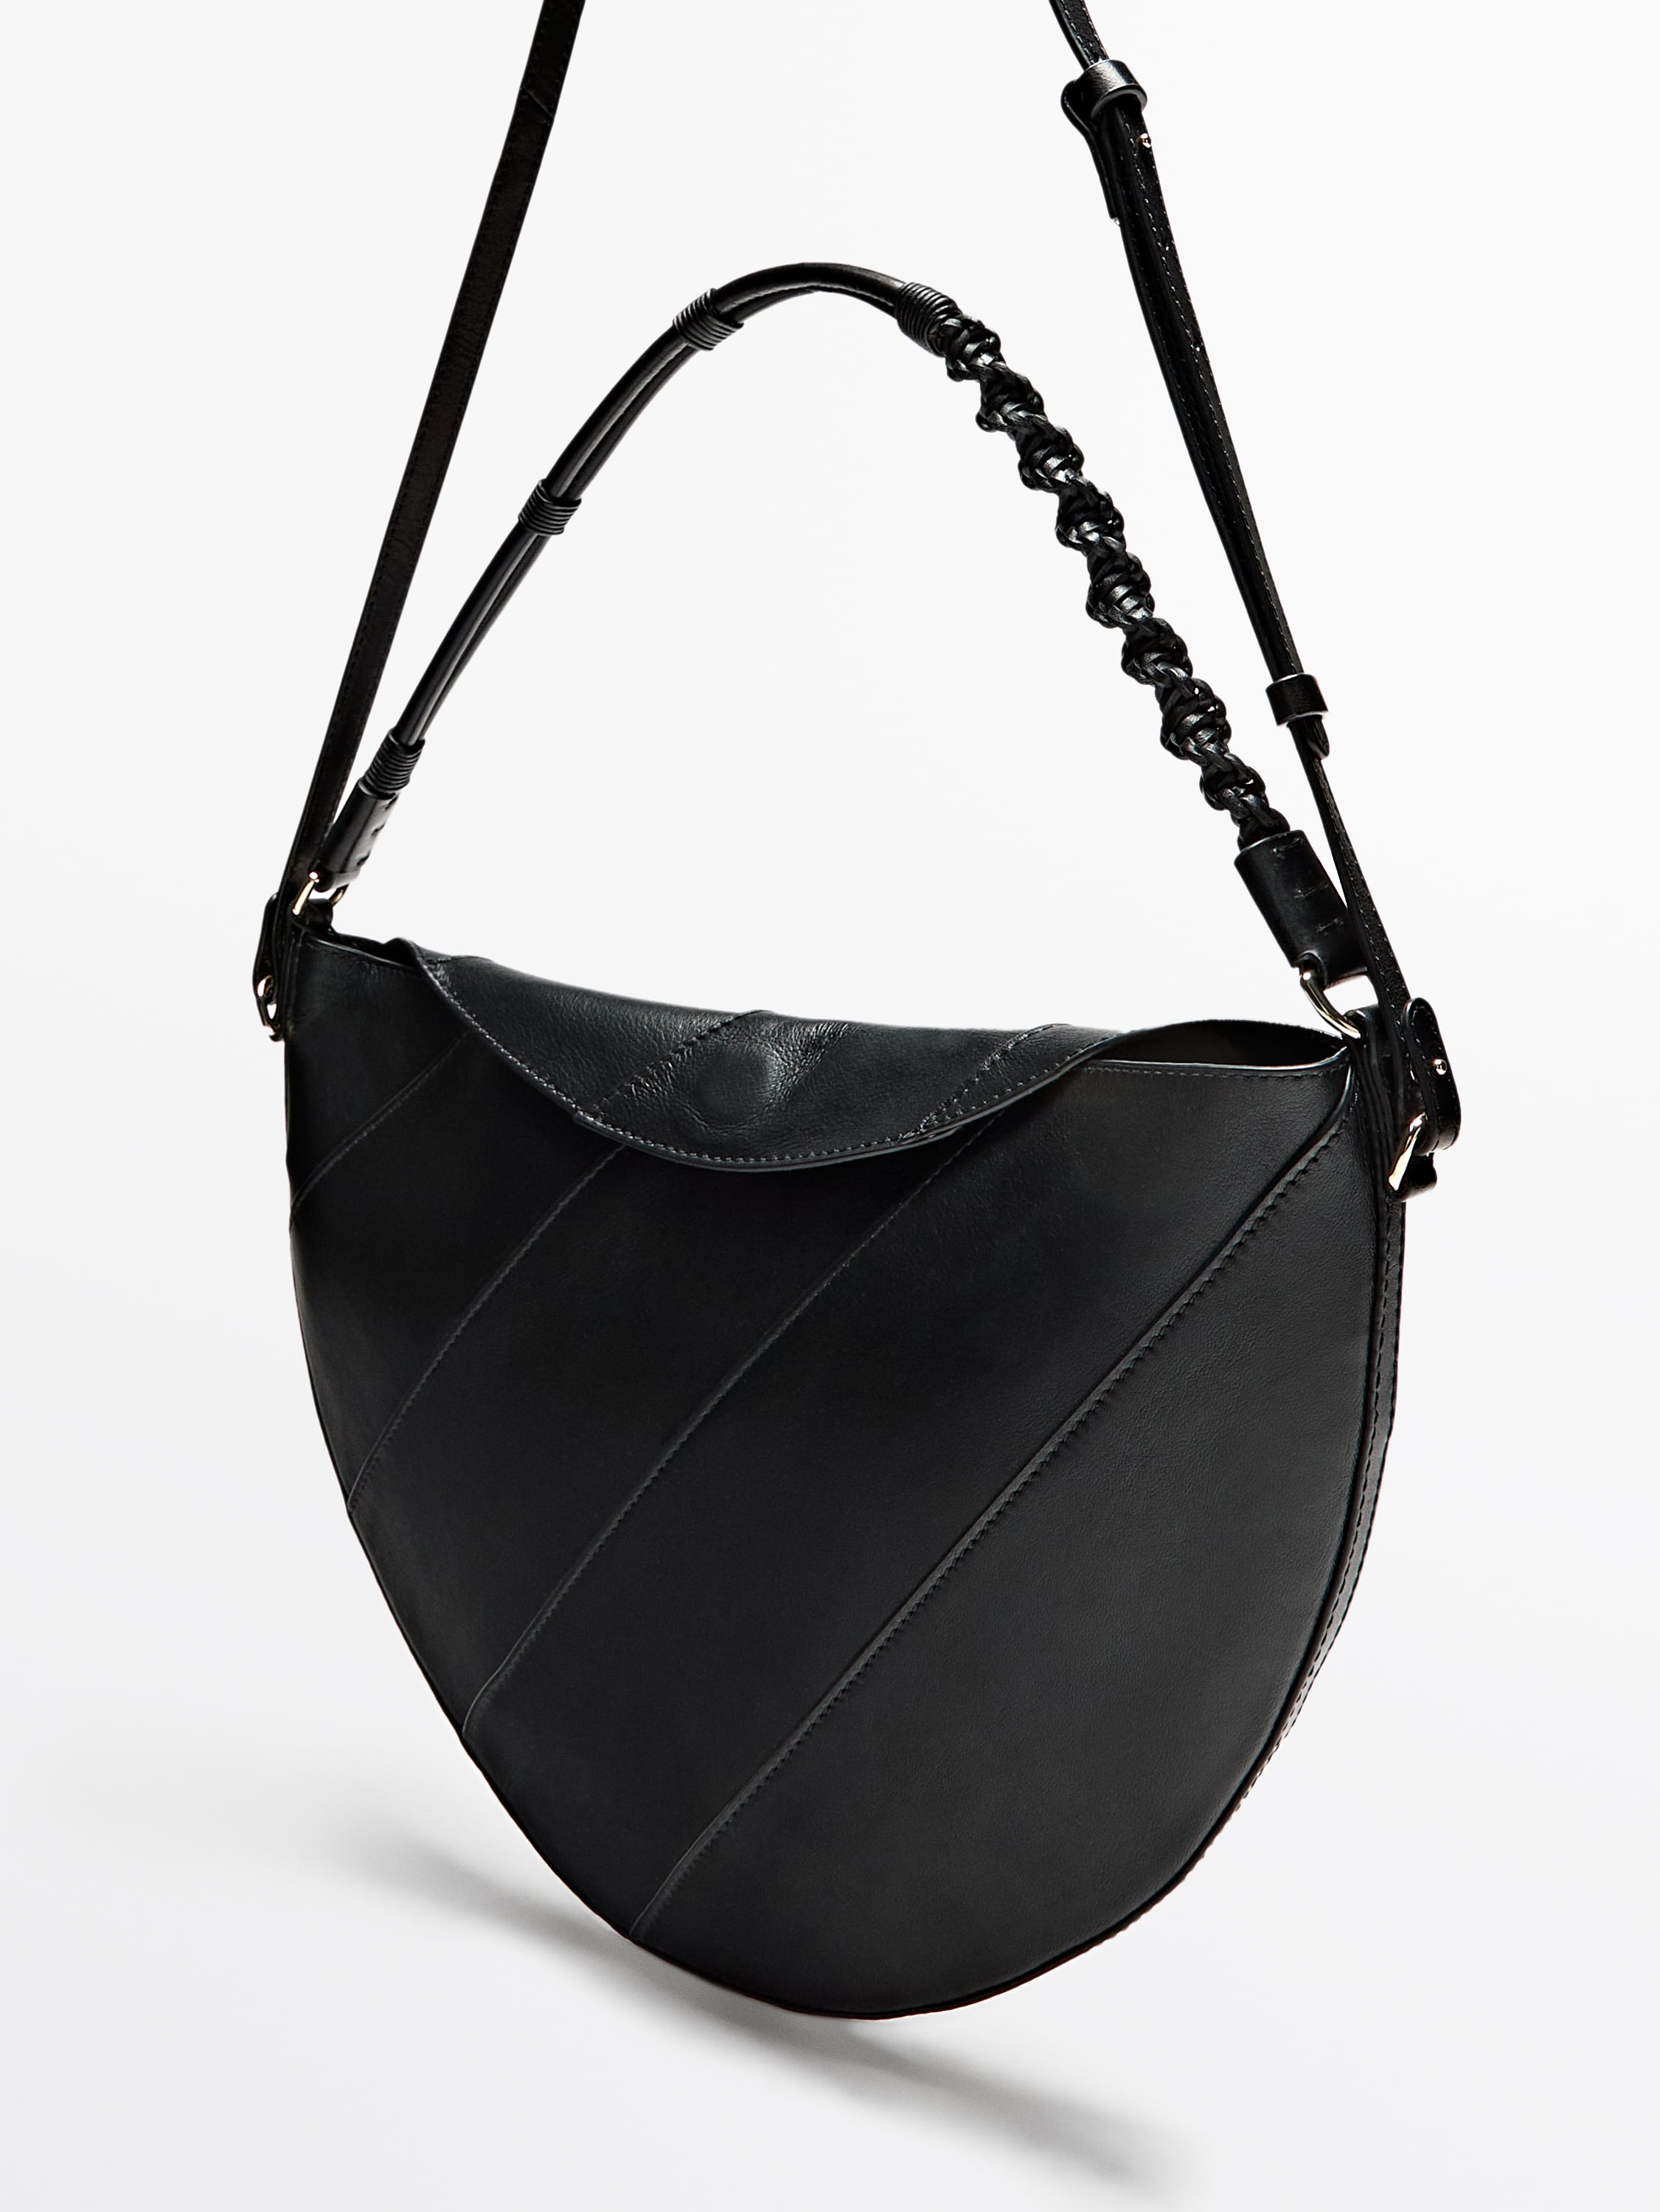 Nappa leather half-moon bag with woven strap